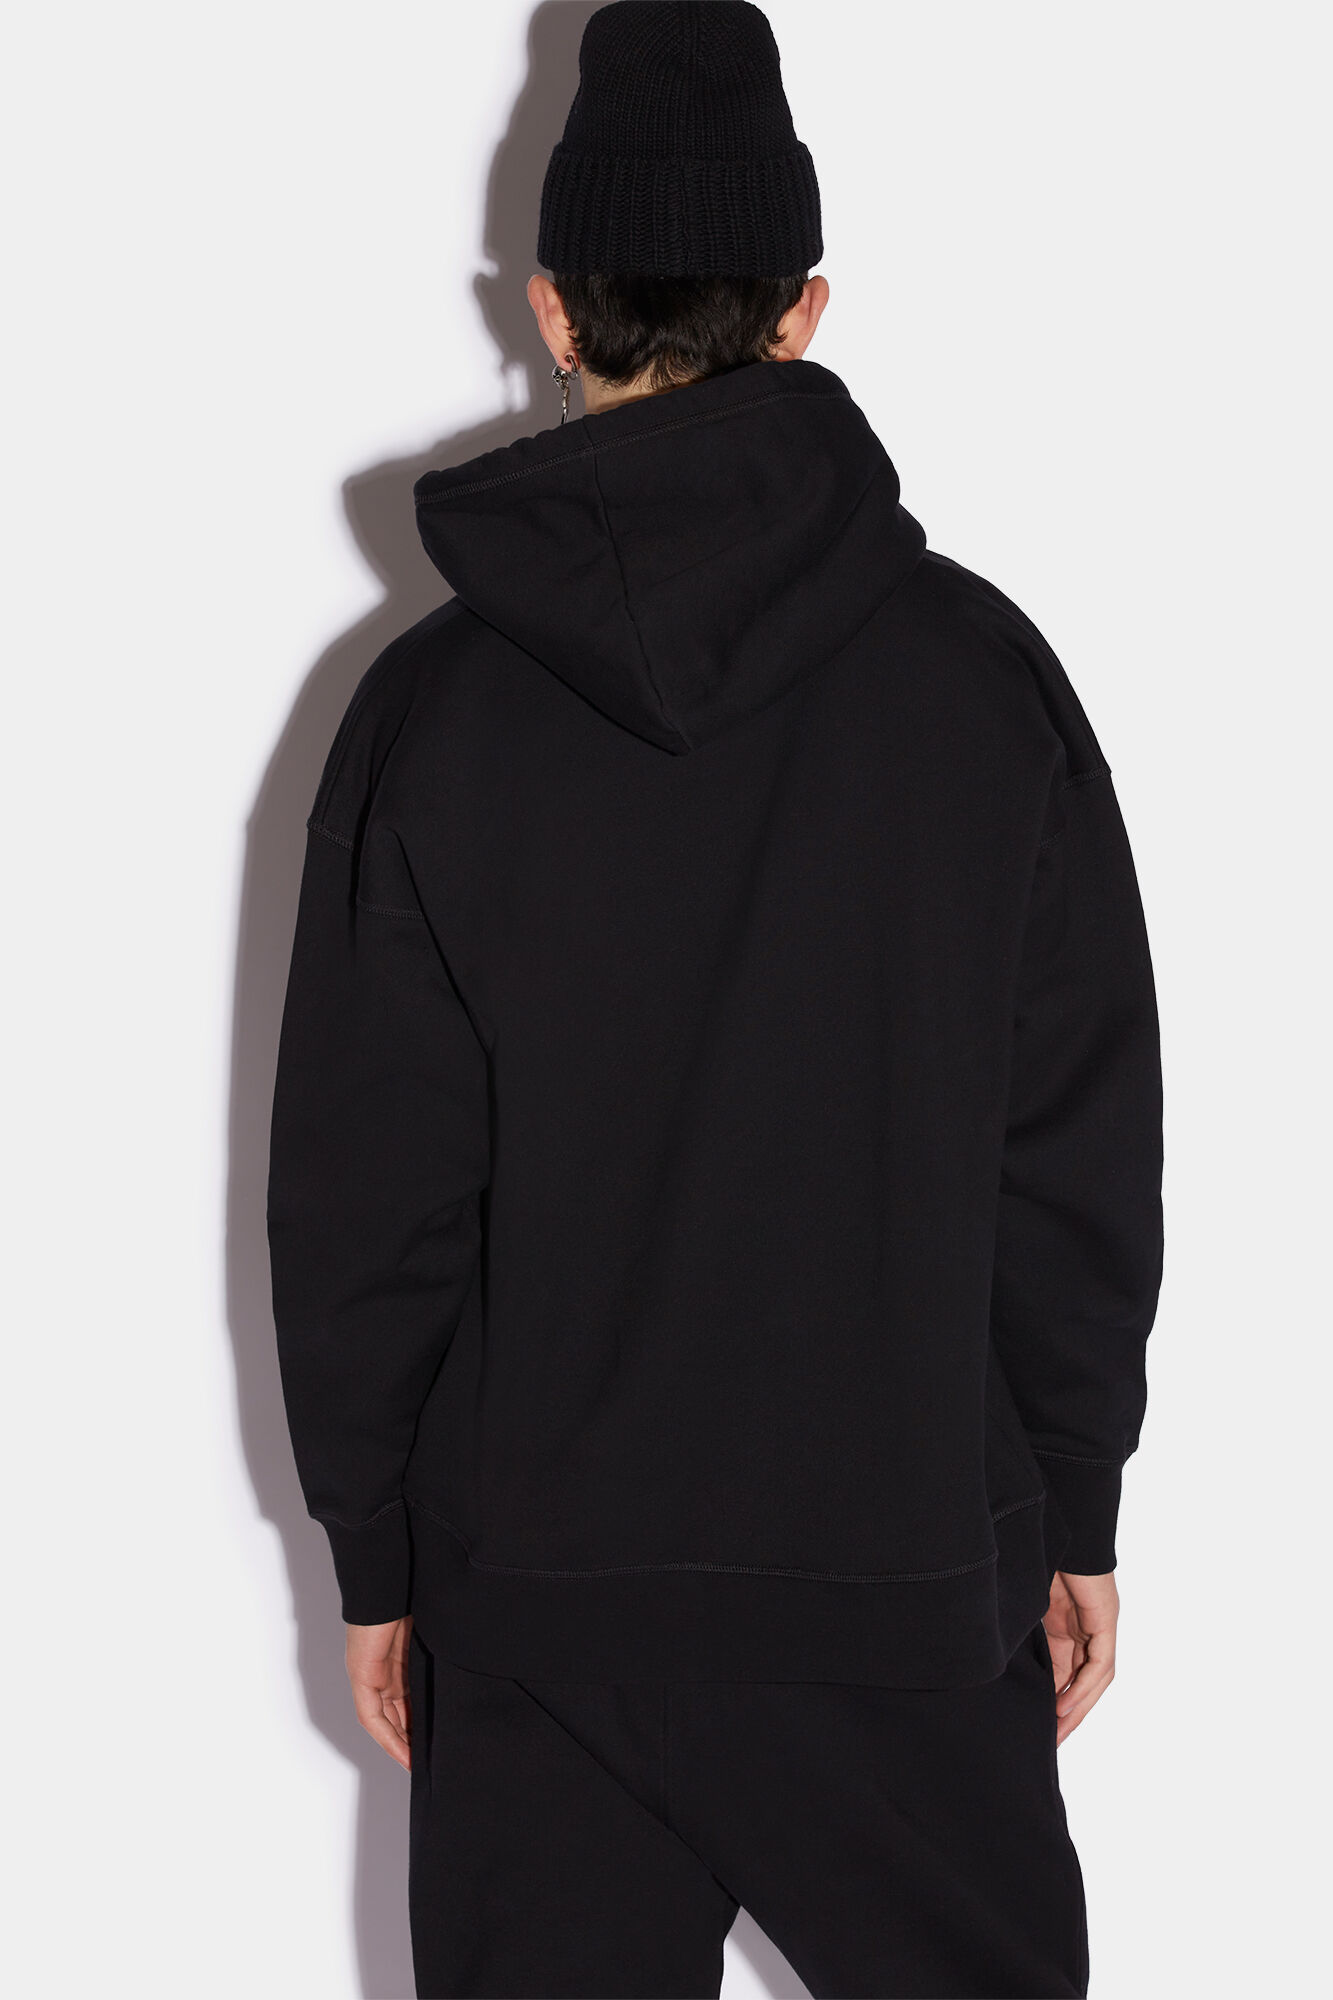 DSQUARED2 BROMANCE SLOUCH HOODIE